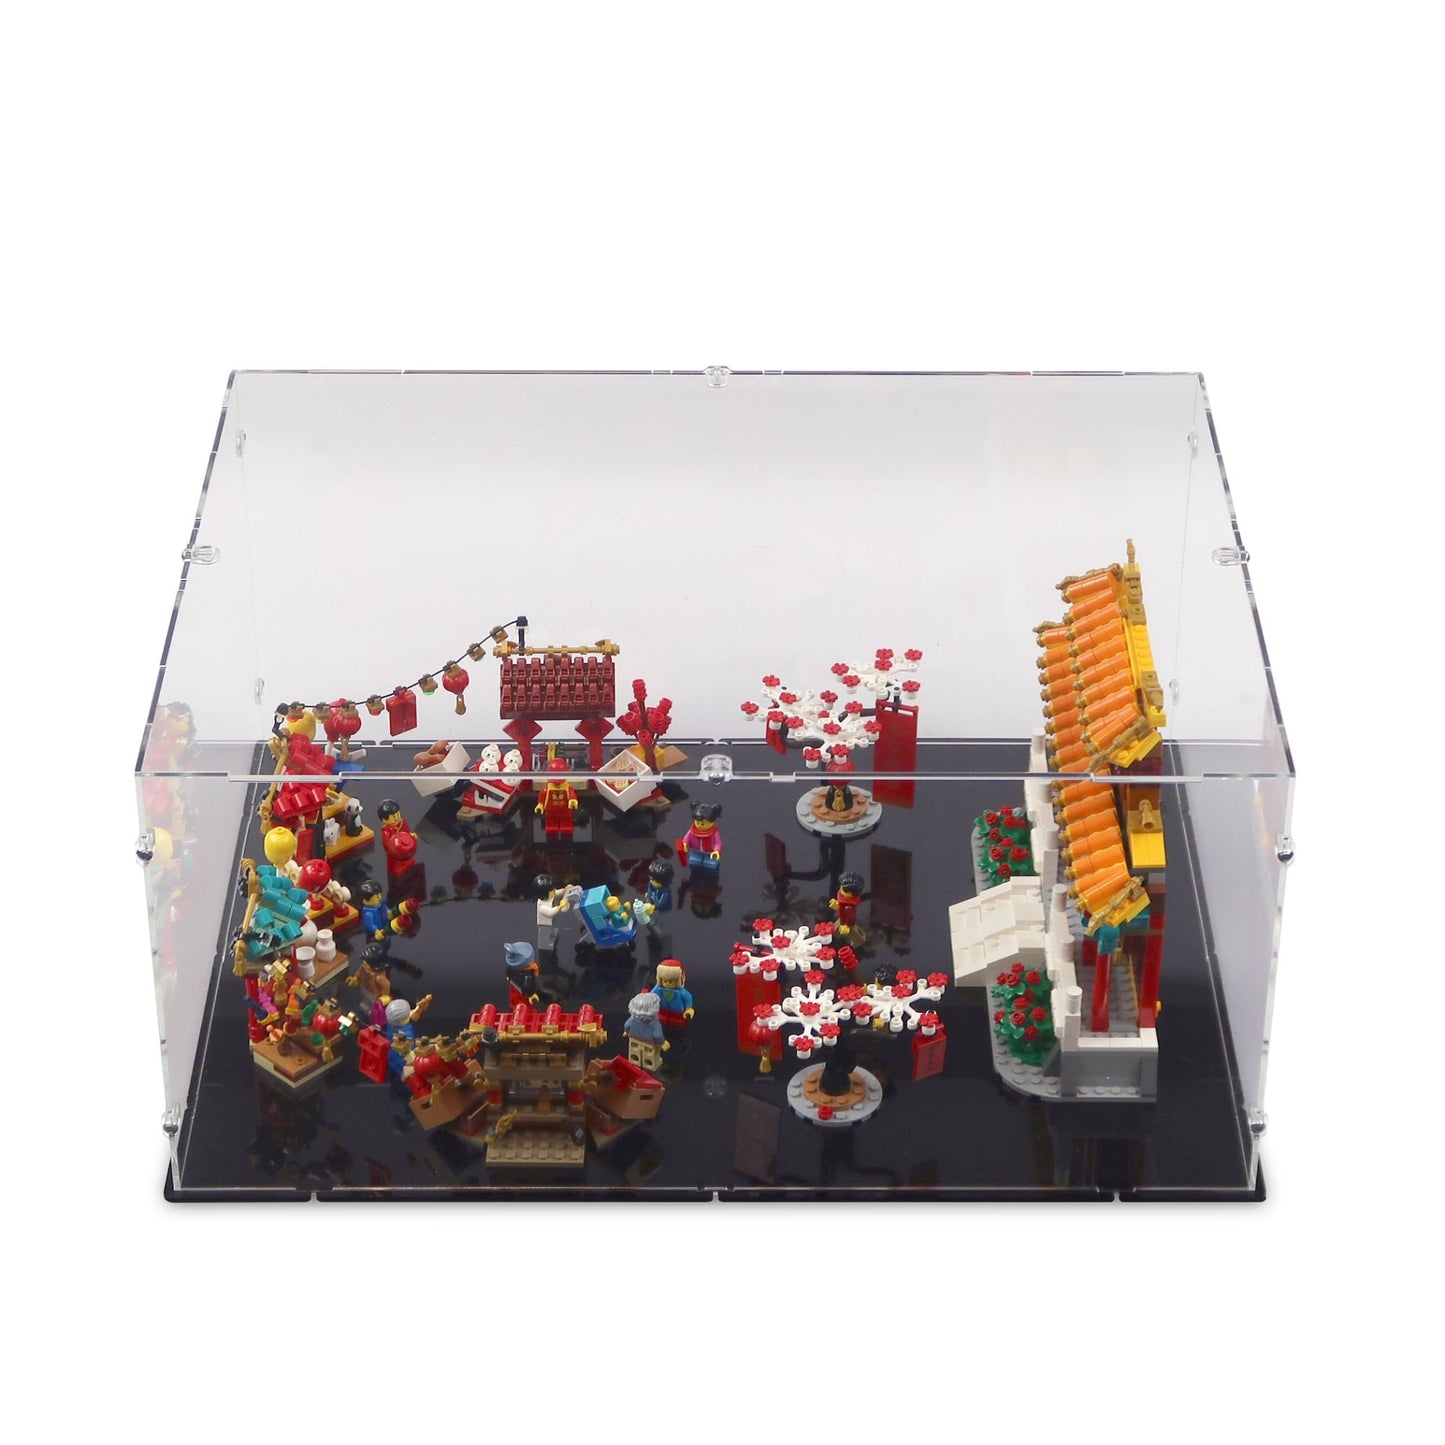 80105 Chinese New Year Temple Fair Display Case